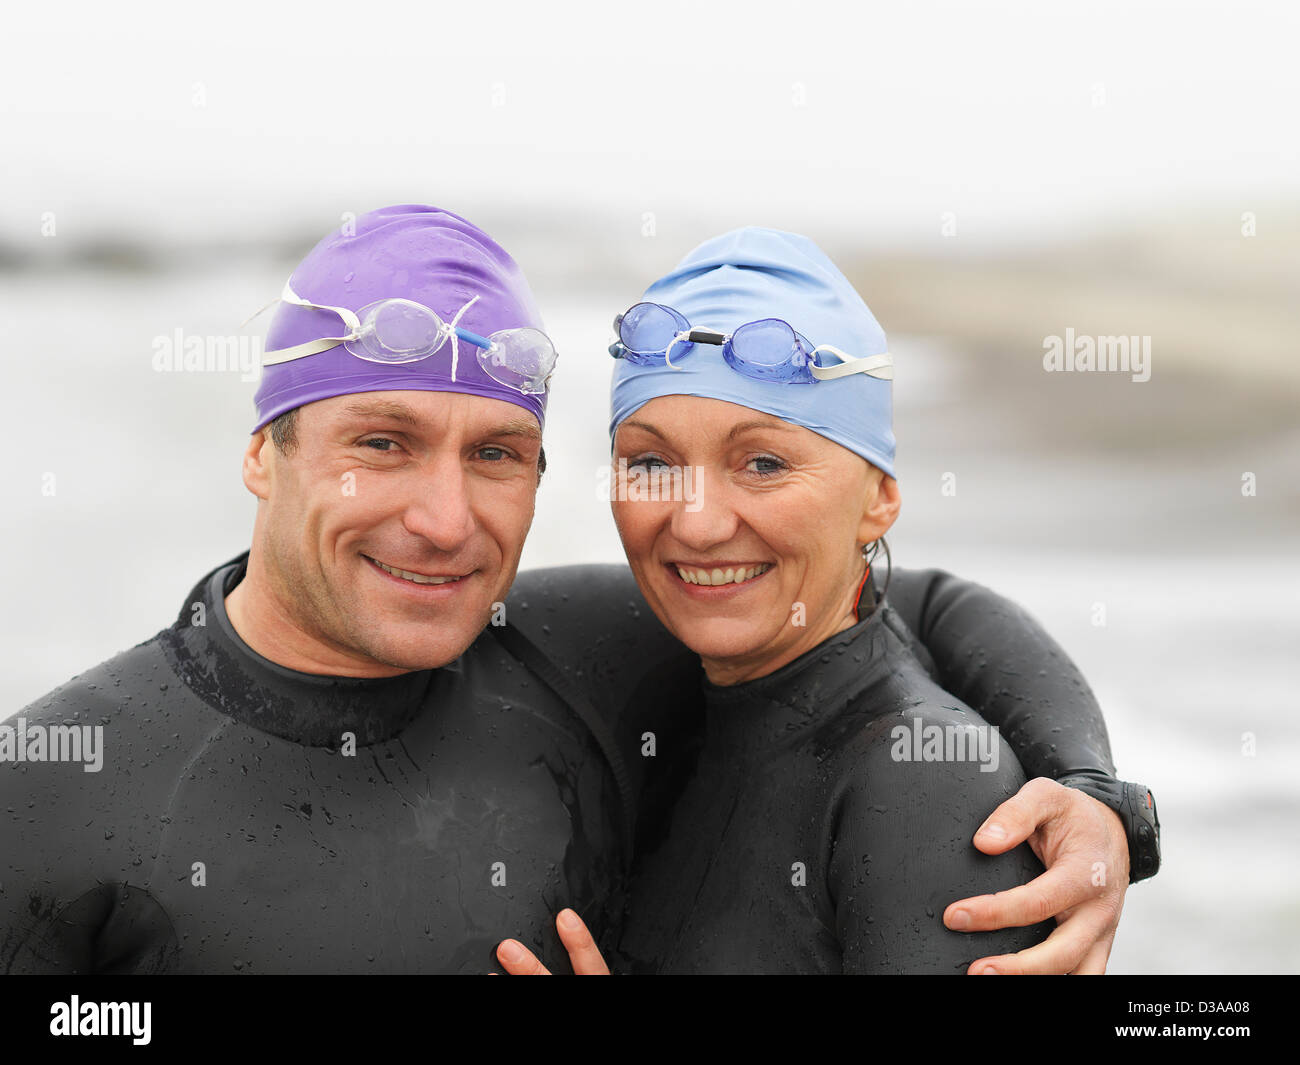 Divers smiling together on beach Stock Photo